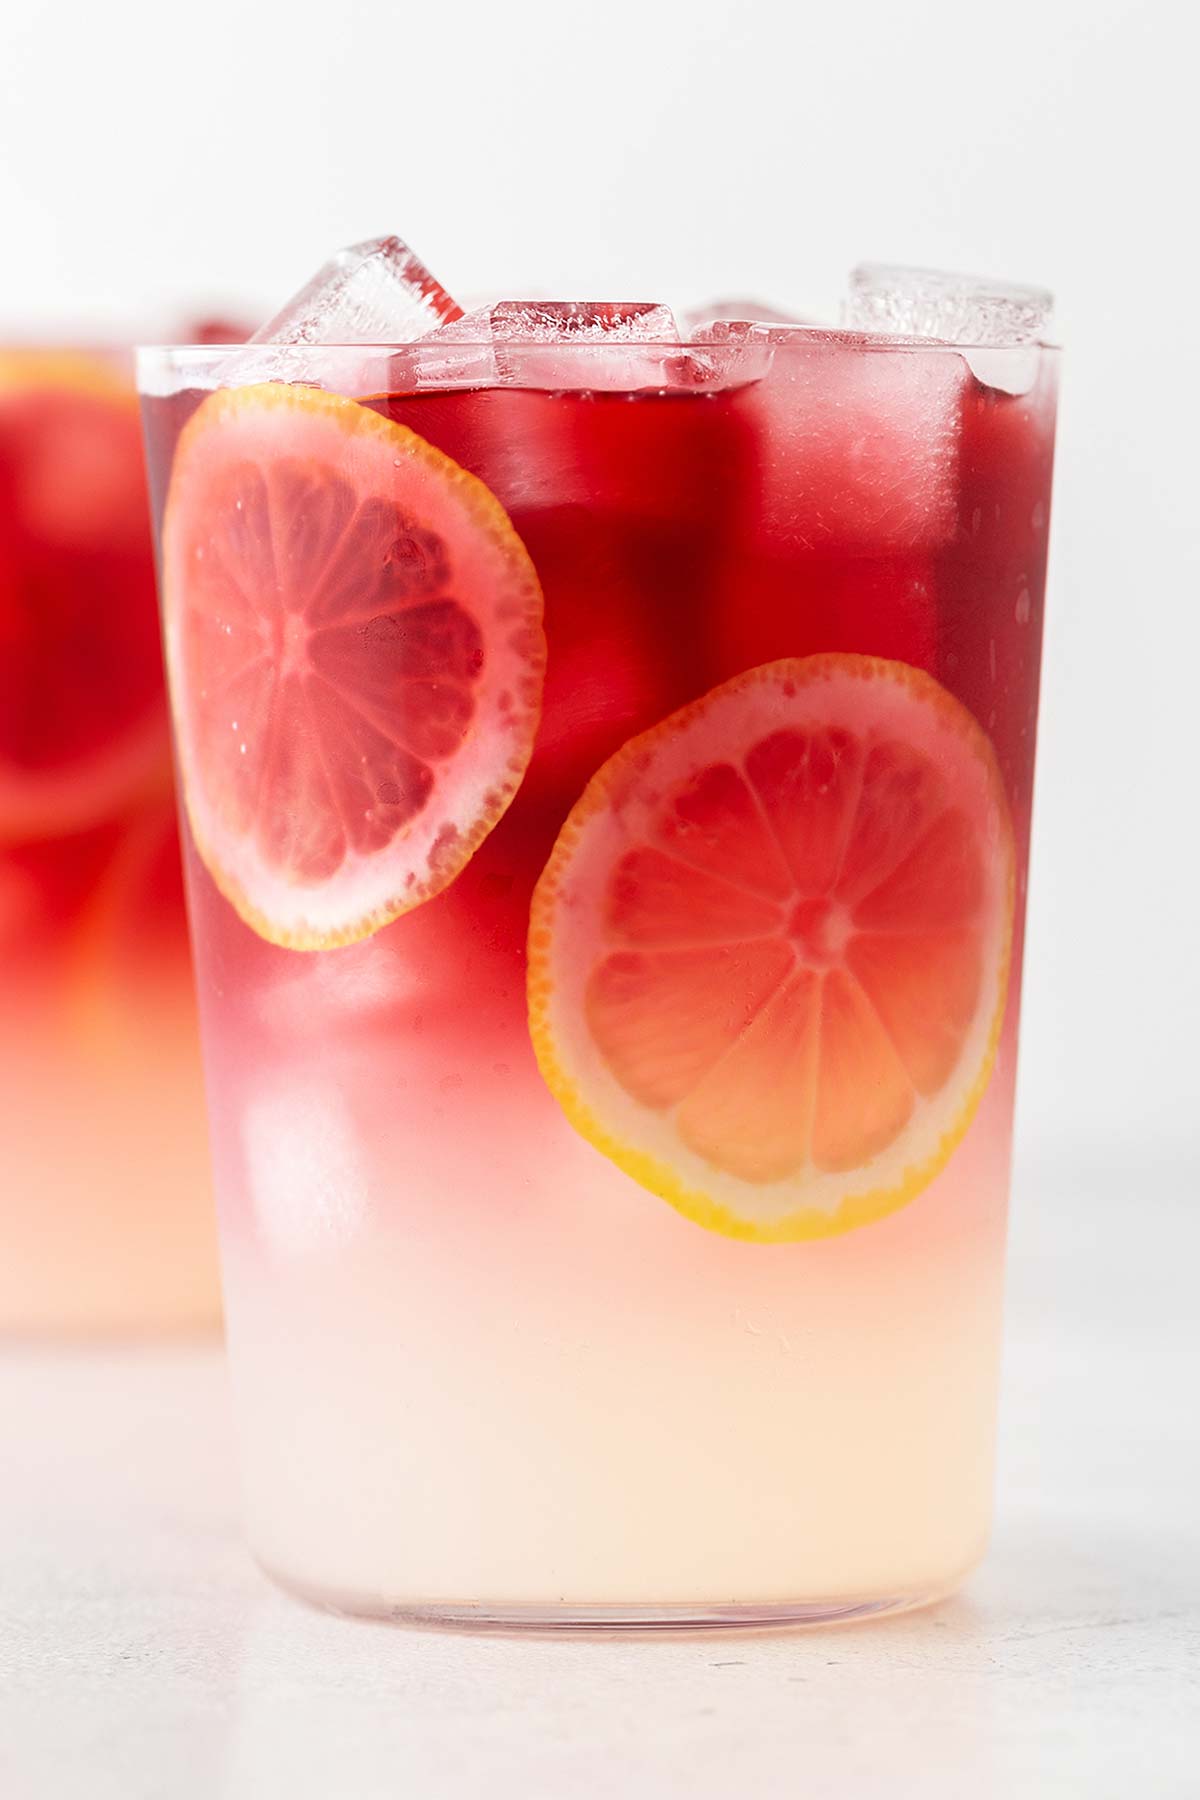 Hibiscus Lemonade in a clear glass with lemon slices.